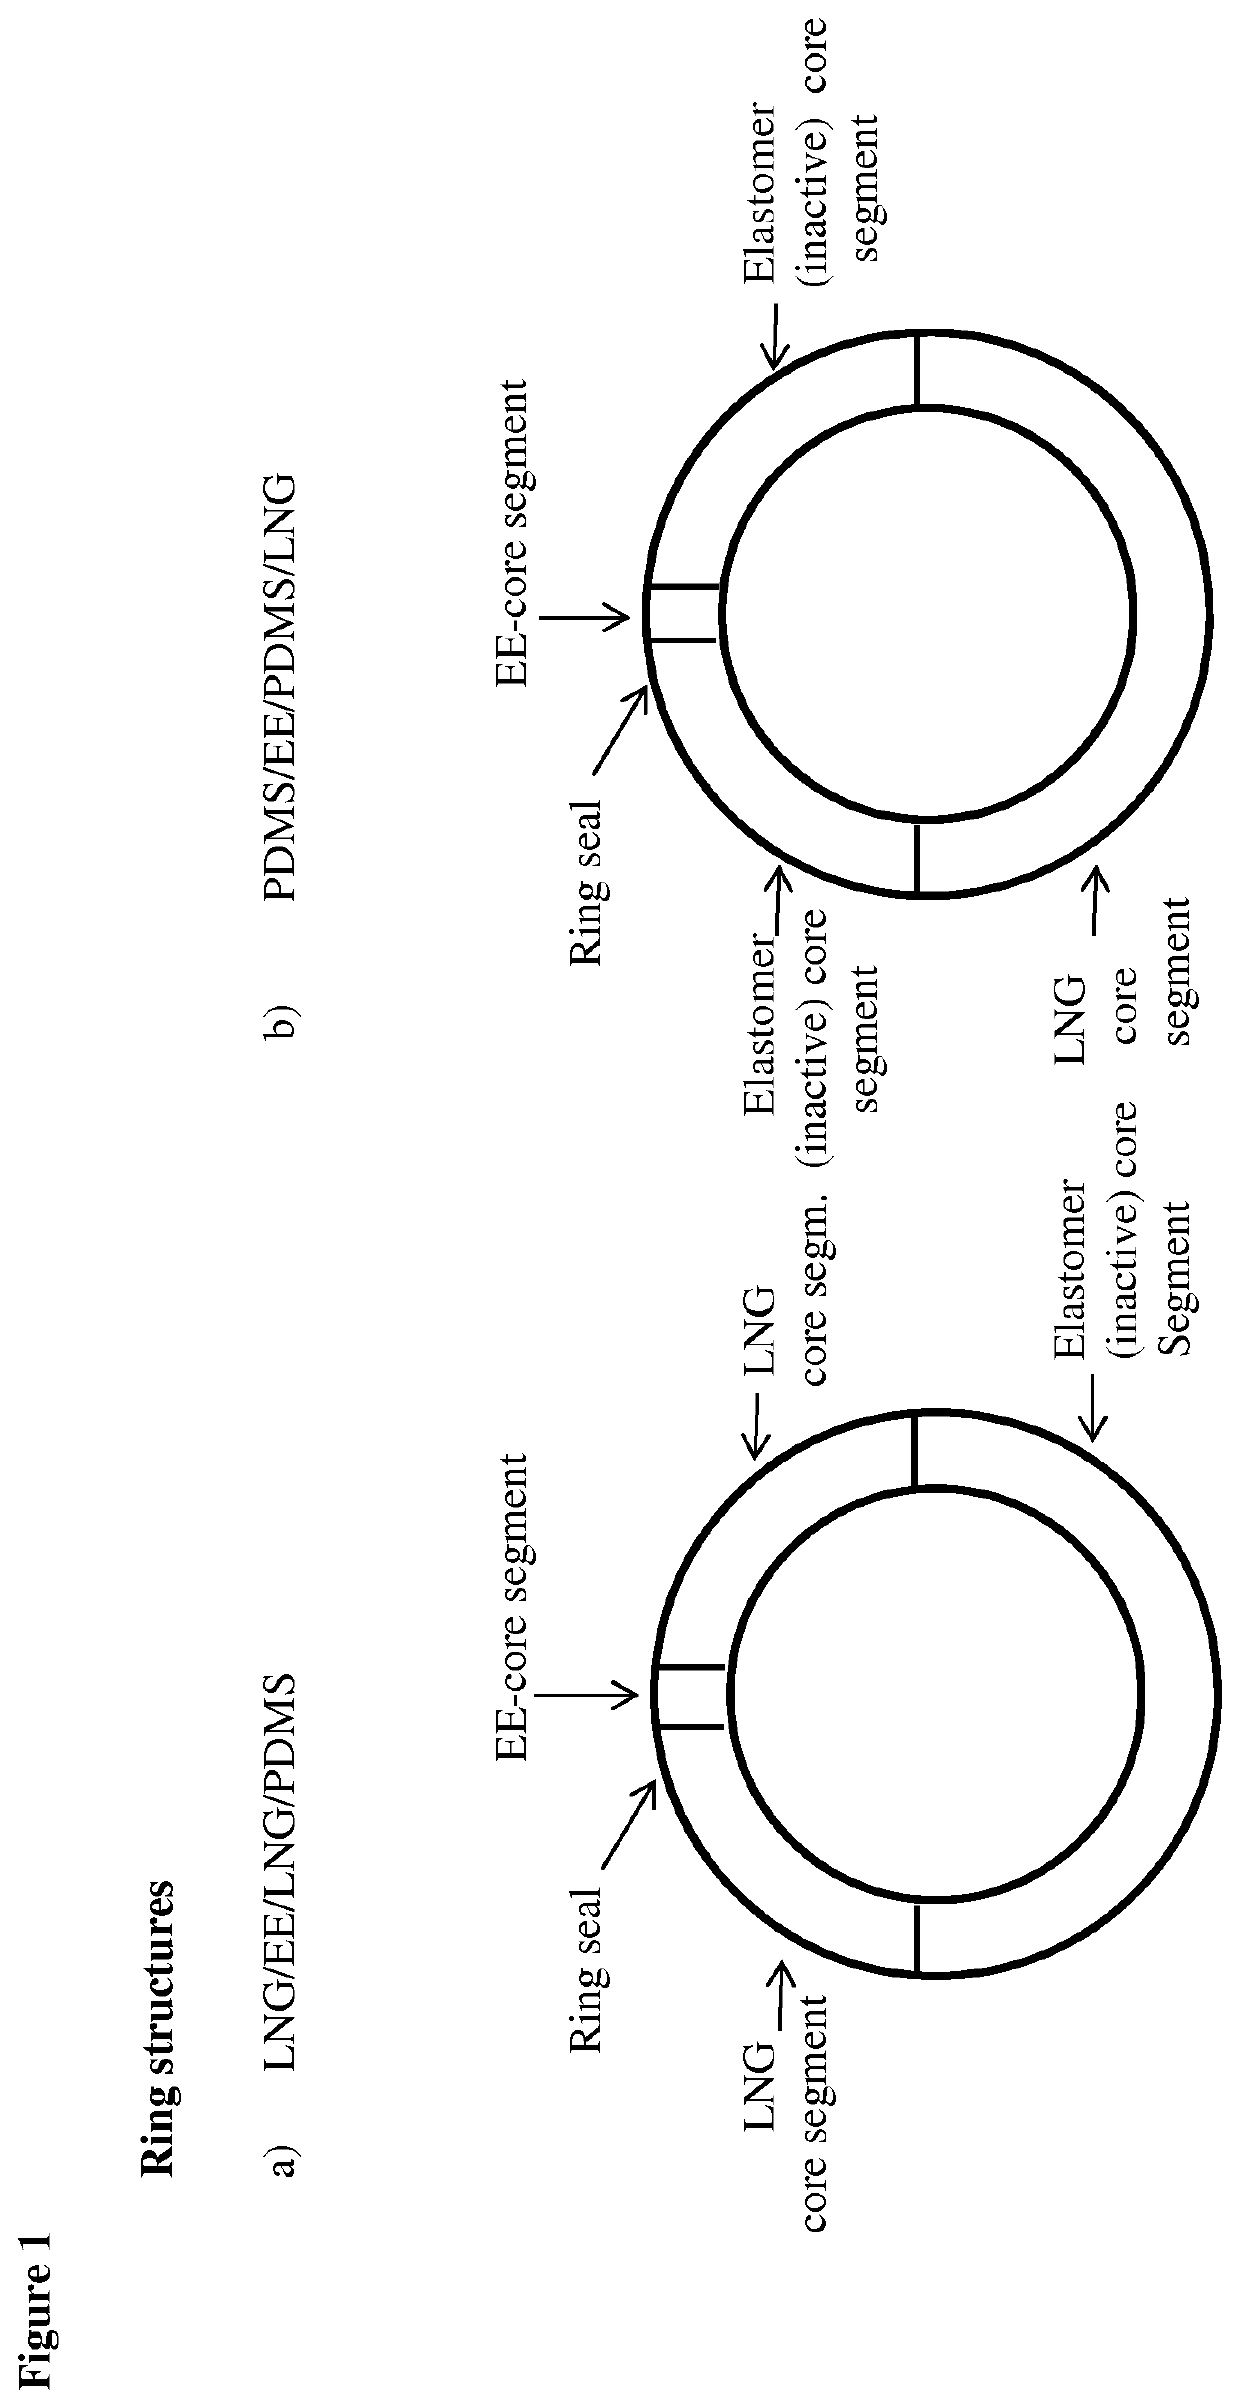 Long acting drug delivery device and its use in contraception